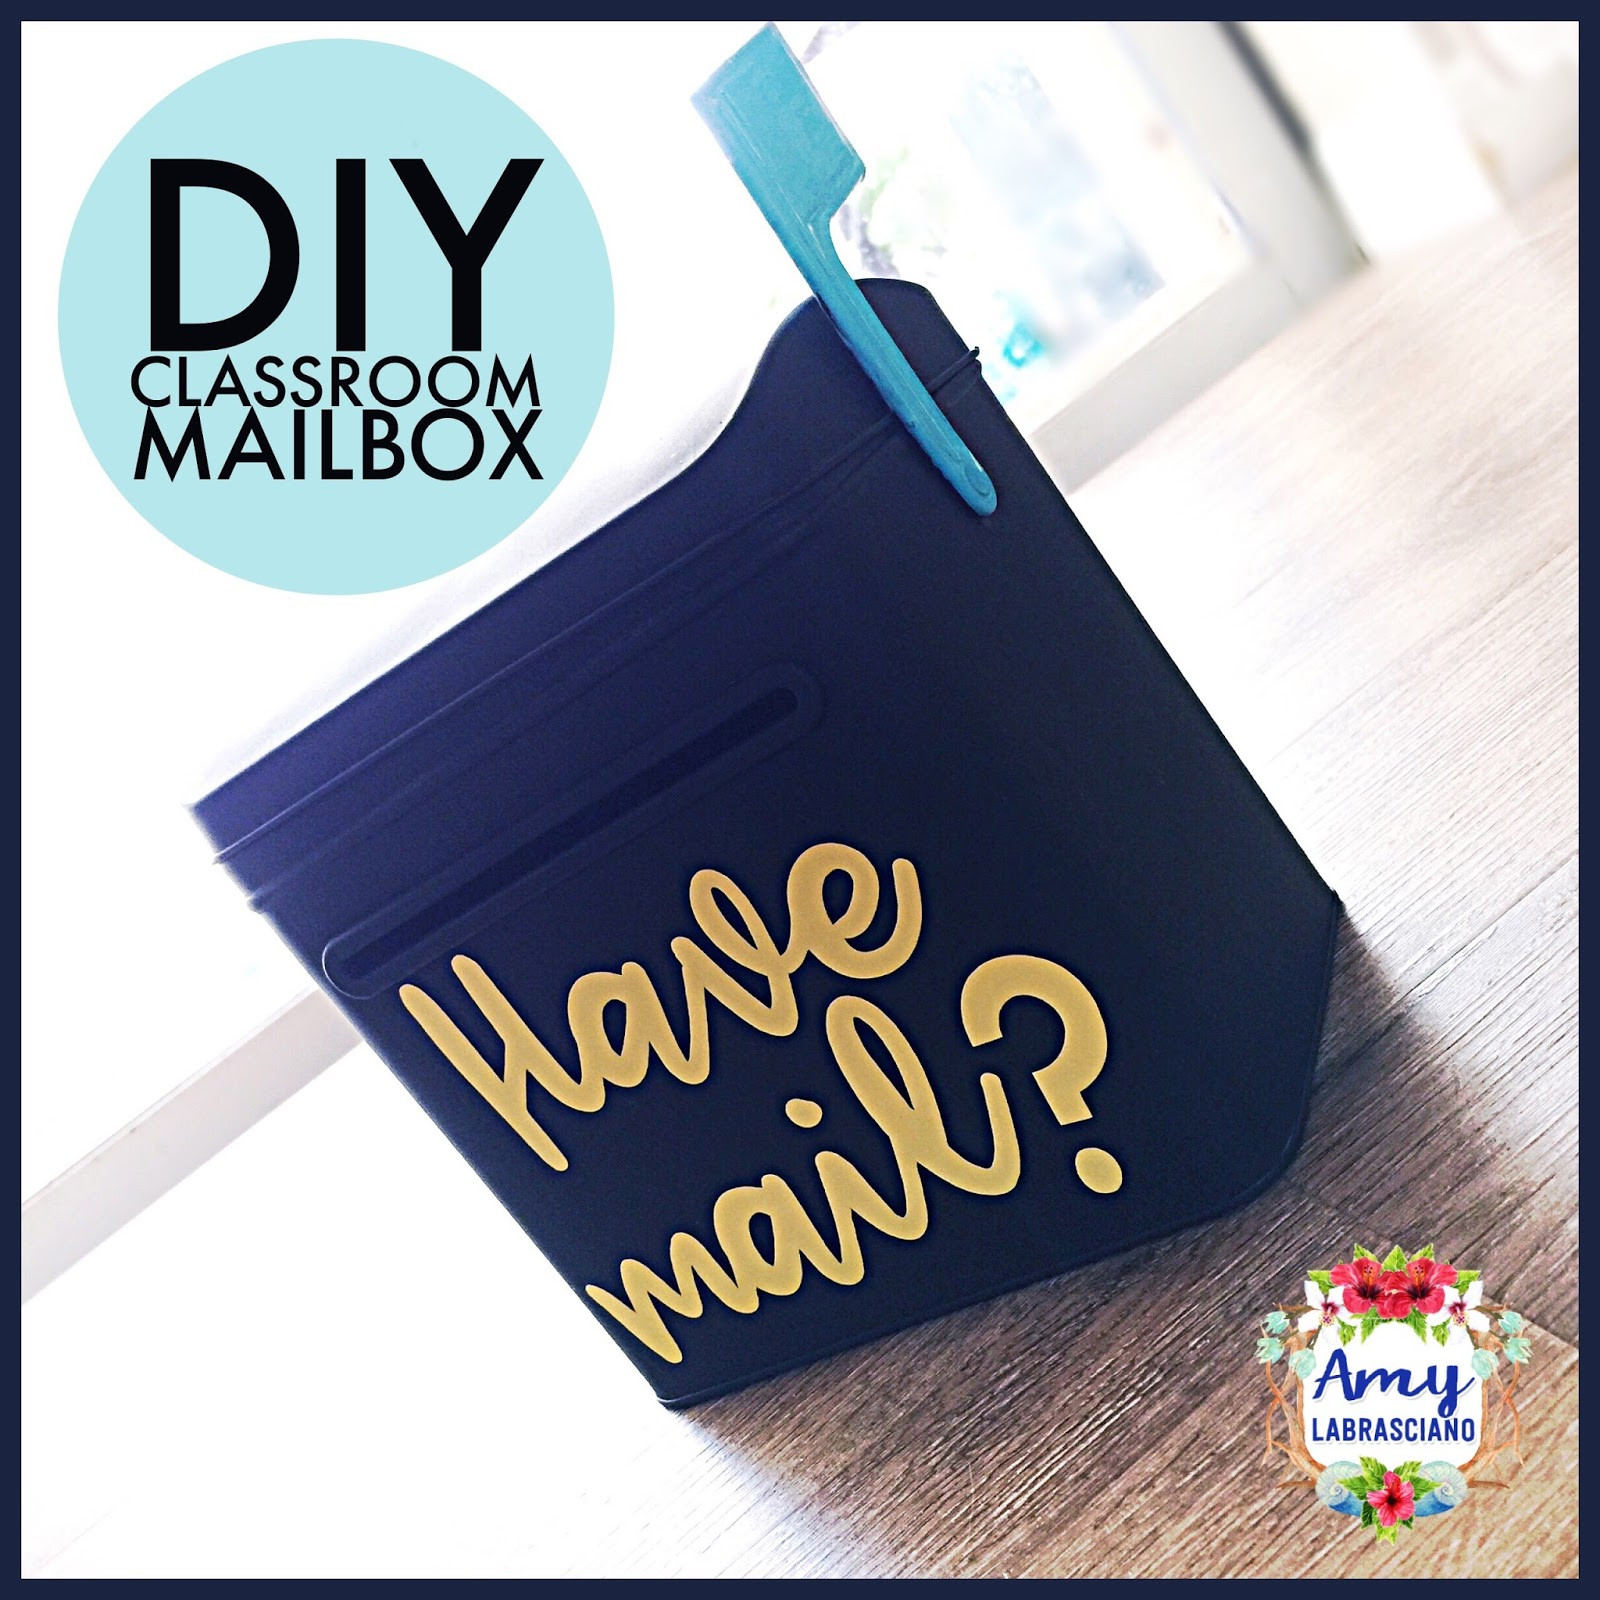 DIY Classroom Mailbox
 Learning Lessons With Amy Labrasciano DIY Classroom Mailbox